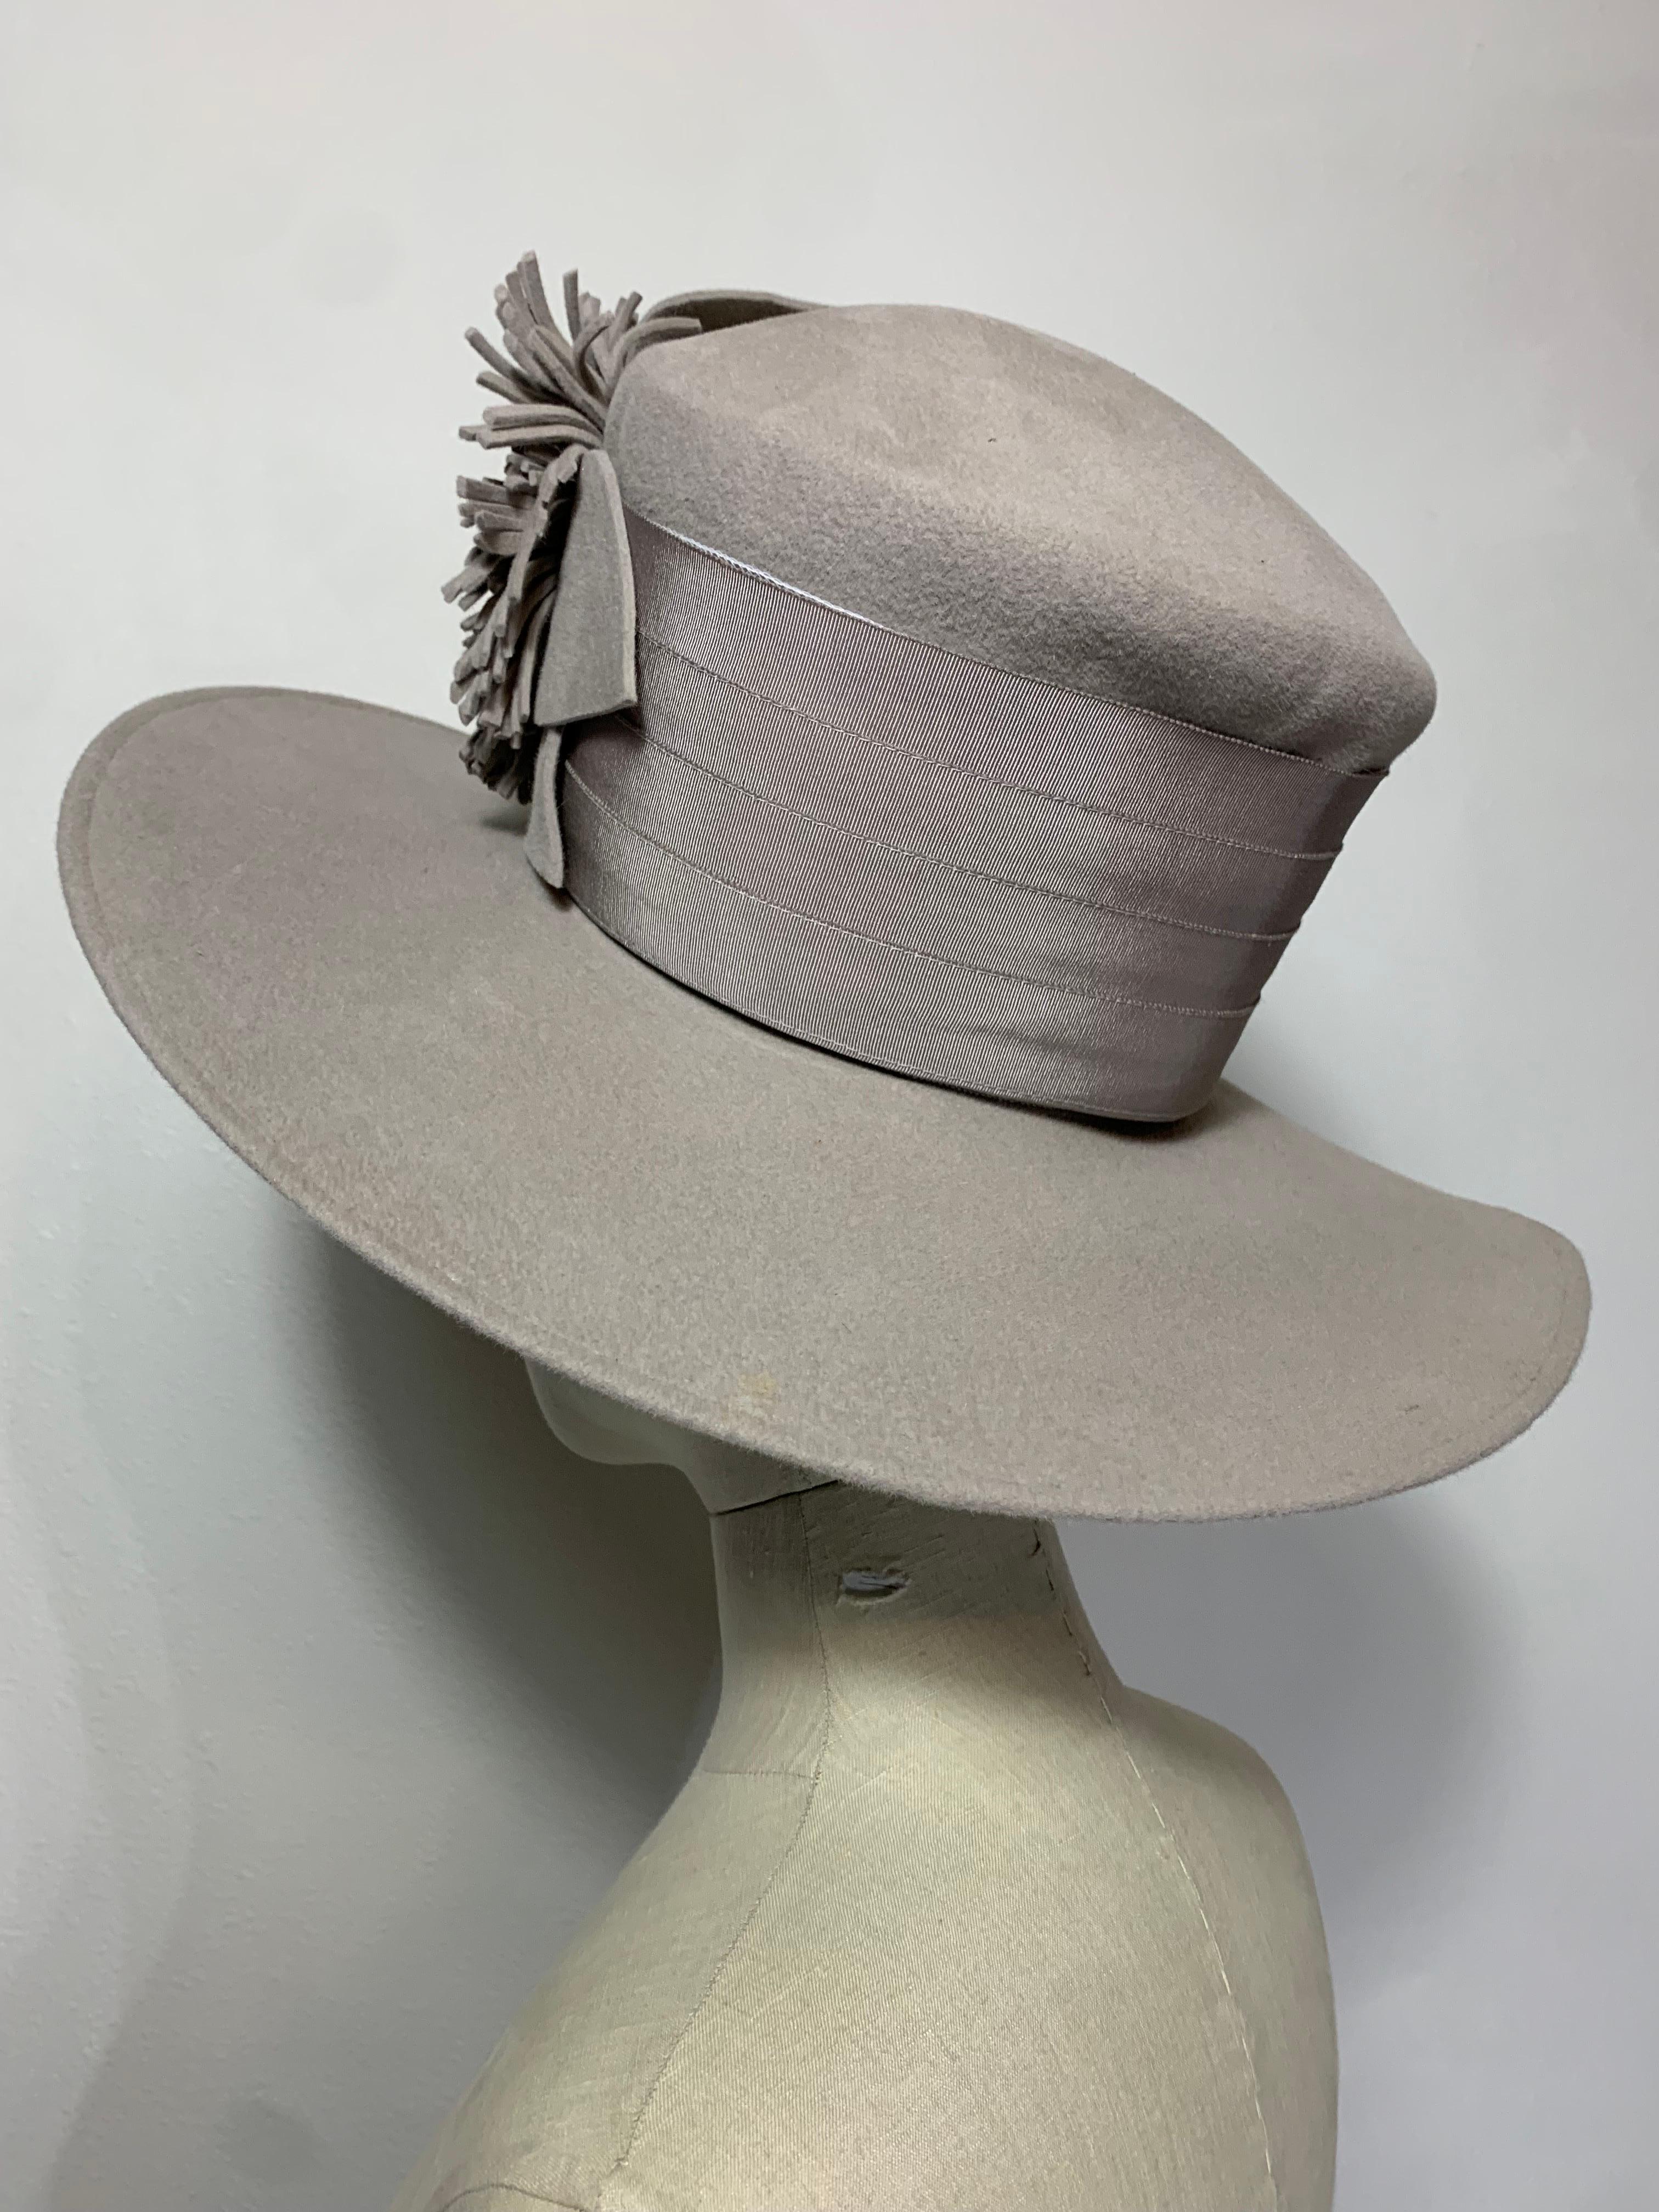 Maison Michel Dove Grey Felt High Top Hat w Matching Flower and Grosgrain Band For Sale 2